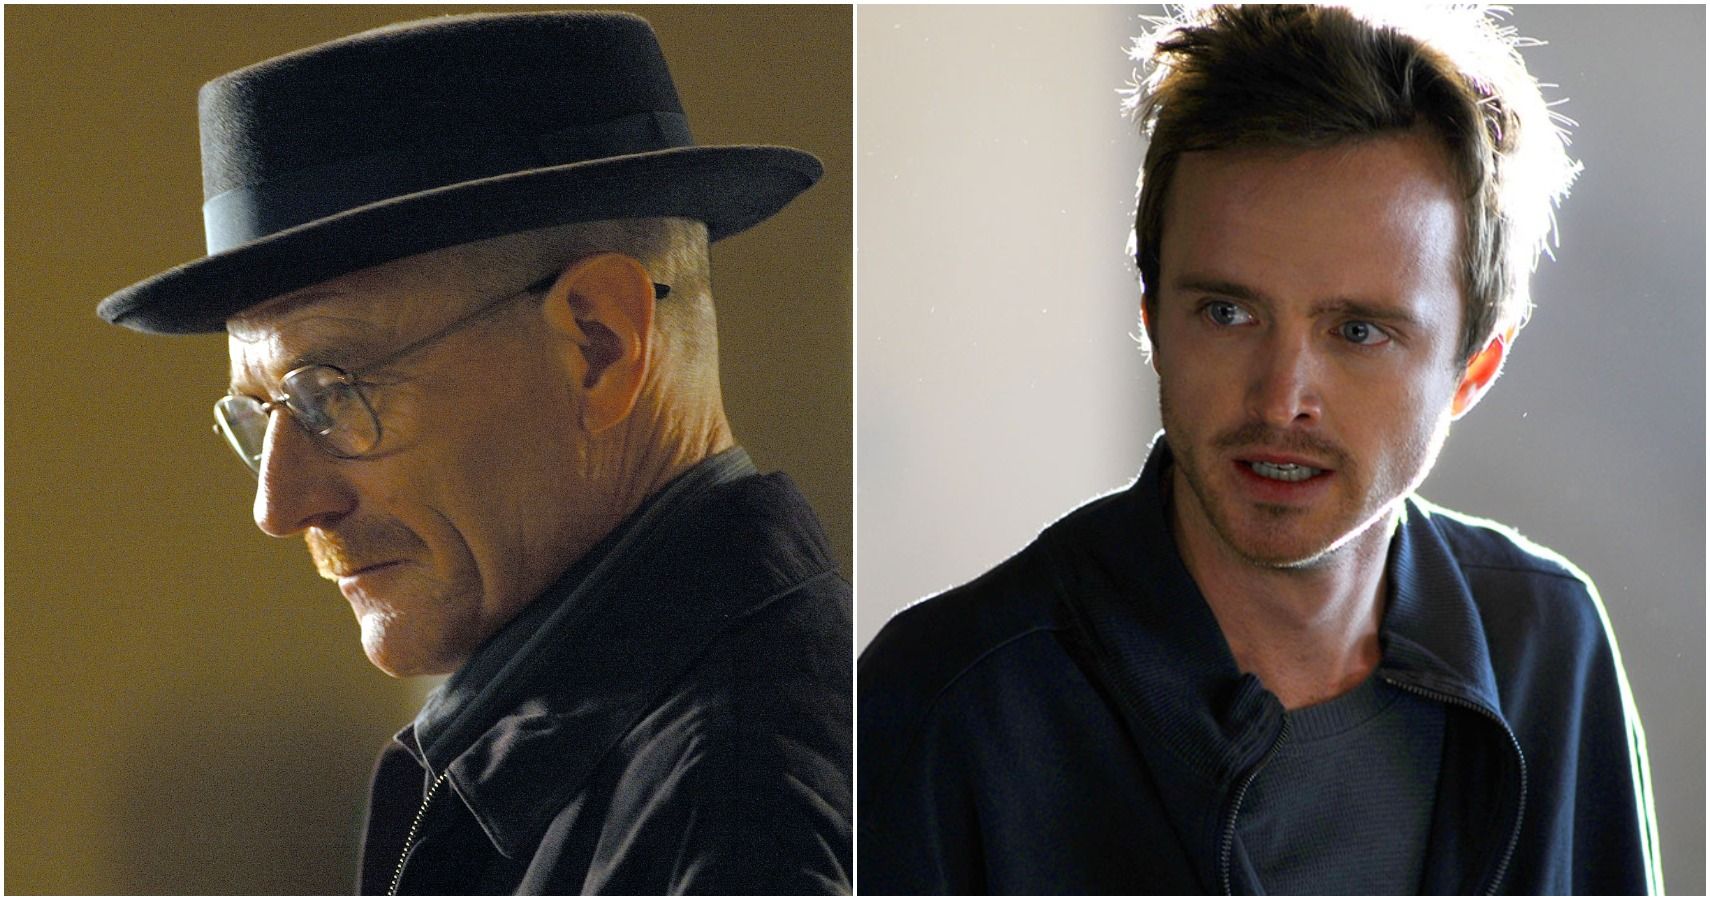 Breaking Bad A Ranking Of The Cast (According To Their Net Worth)